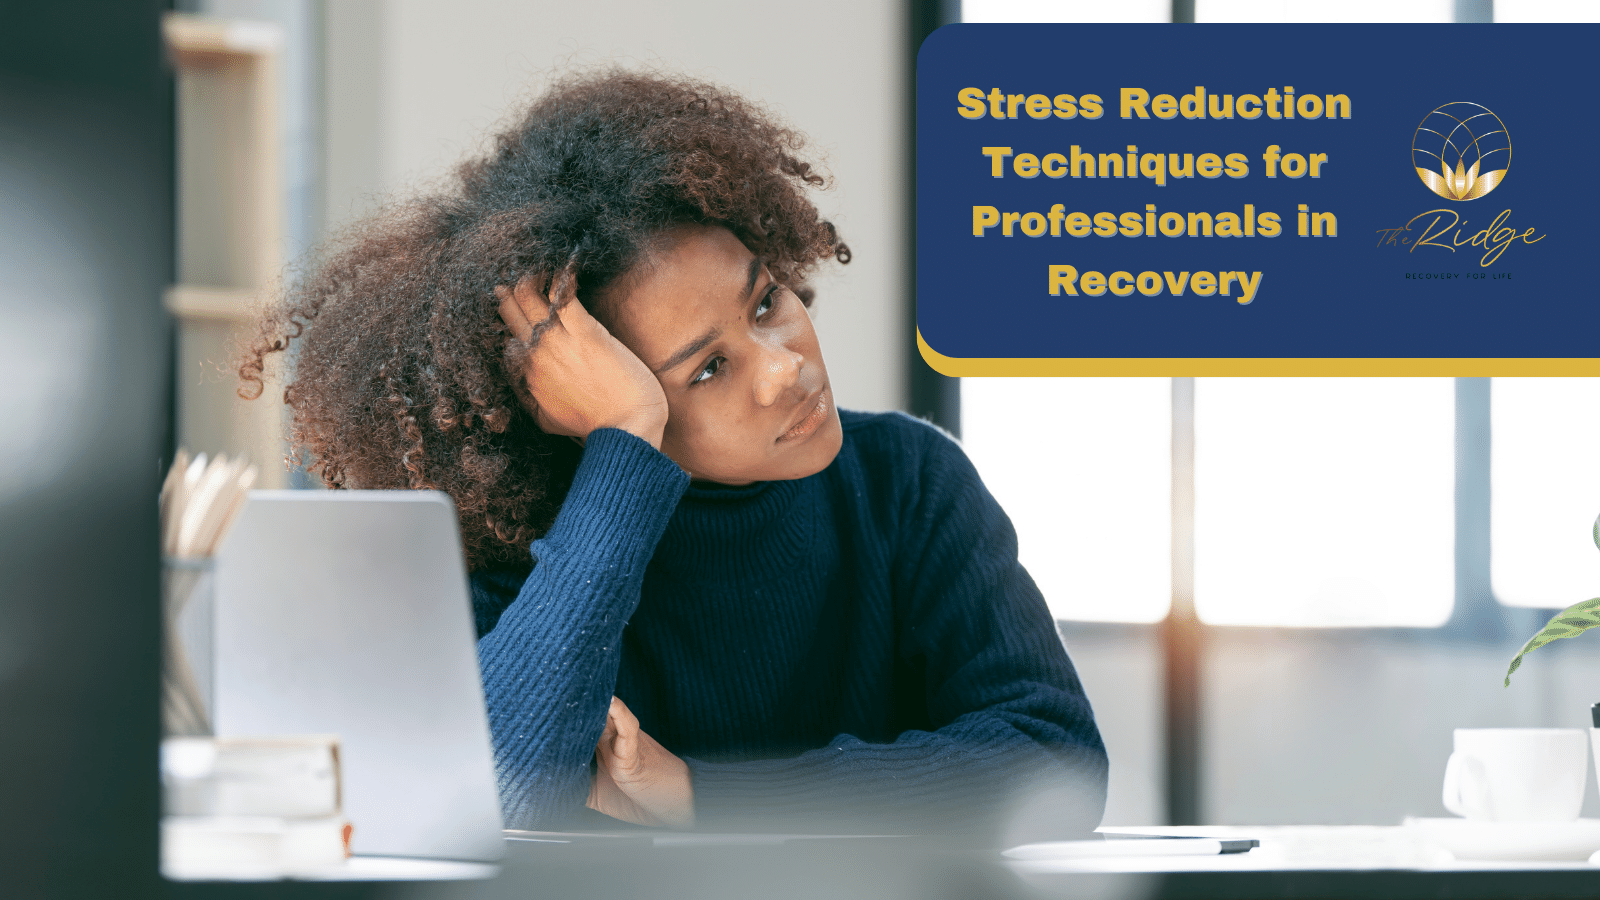 Stress Reduction Techniques for Professionals in Recovery